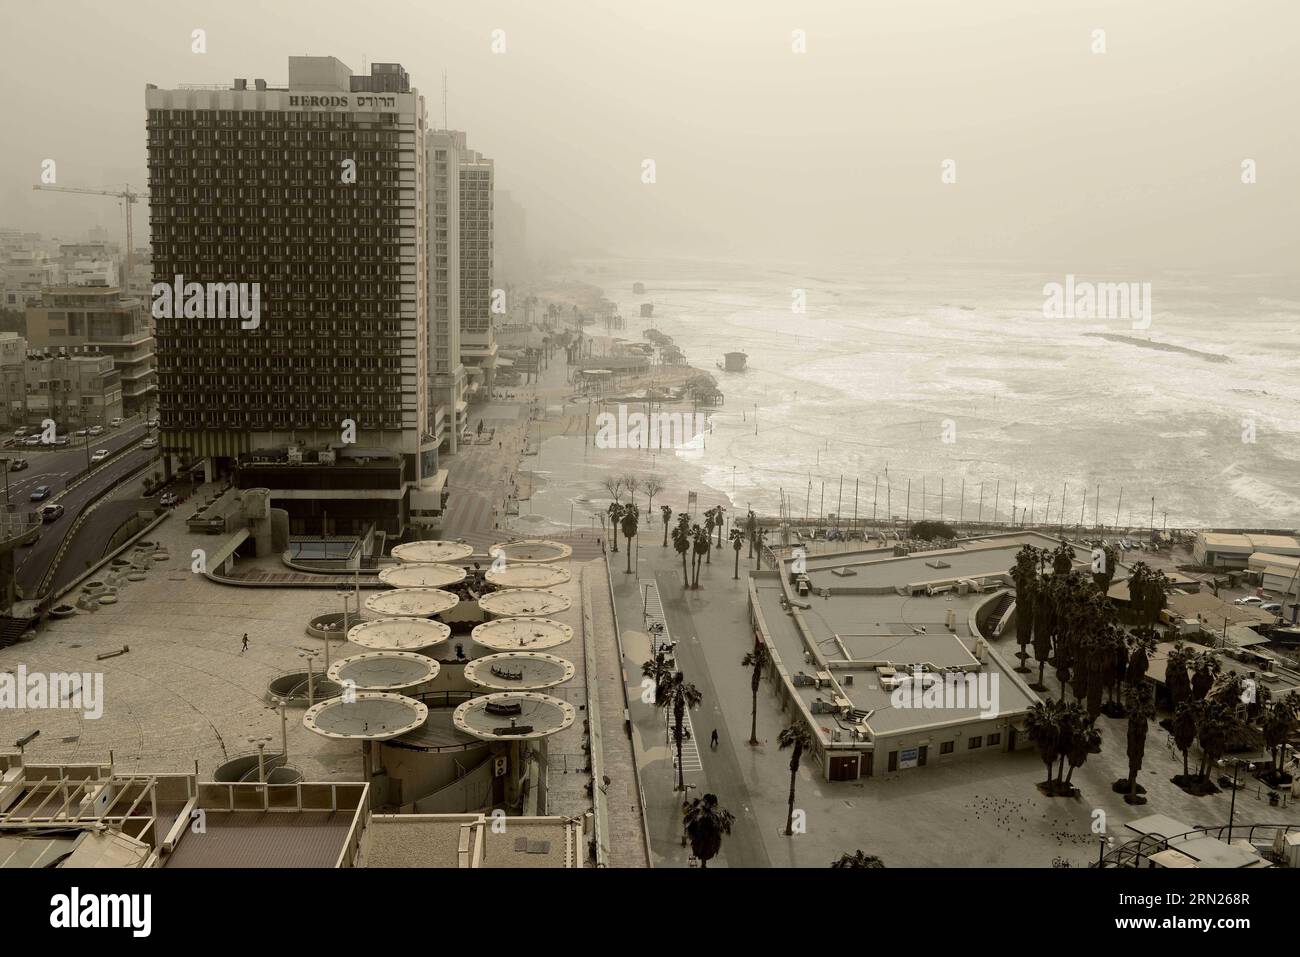 (150212) -- TEL AVIV,  Tides of Mediterranean sea rise in Tel Aviv, Israel, on Feb. 11, 2015. A sandstorm continues to blow hard in parts of the Middle East on Wednesday, where authorities have remained sea ports closed and briefly grounded flights. Israel has been hit by the developing sandstorm. The country temporarily shut down two airports and suspended all domestic flights Wednesday morning as the sandstorm hit the country, the Israel Airport Authority said in a statement. ISRAEL-TEL AVIV-STORM JINI/TomerxNeubeg PUBLICATIONxNOTxINxCHN   Tel Aviv Tides of Mediterranean Sea Rise in Tel Aviv Stock Photo